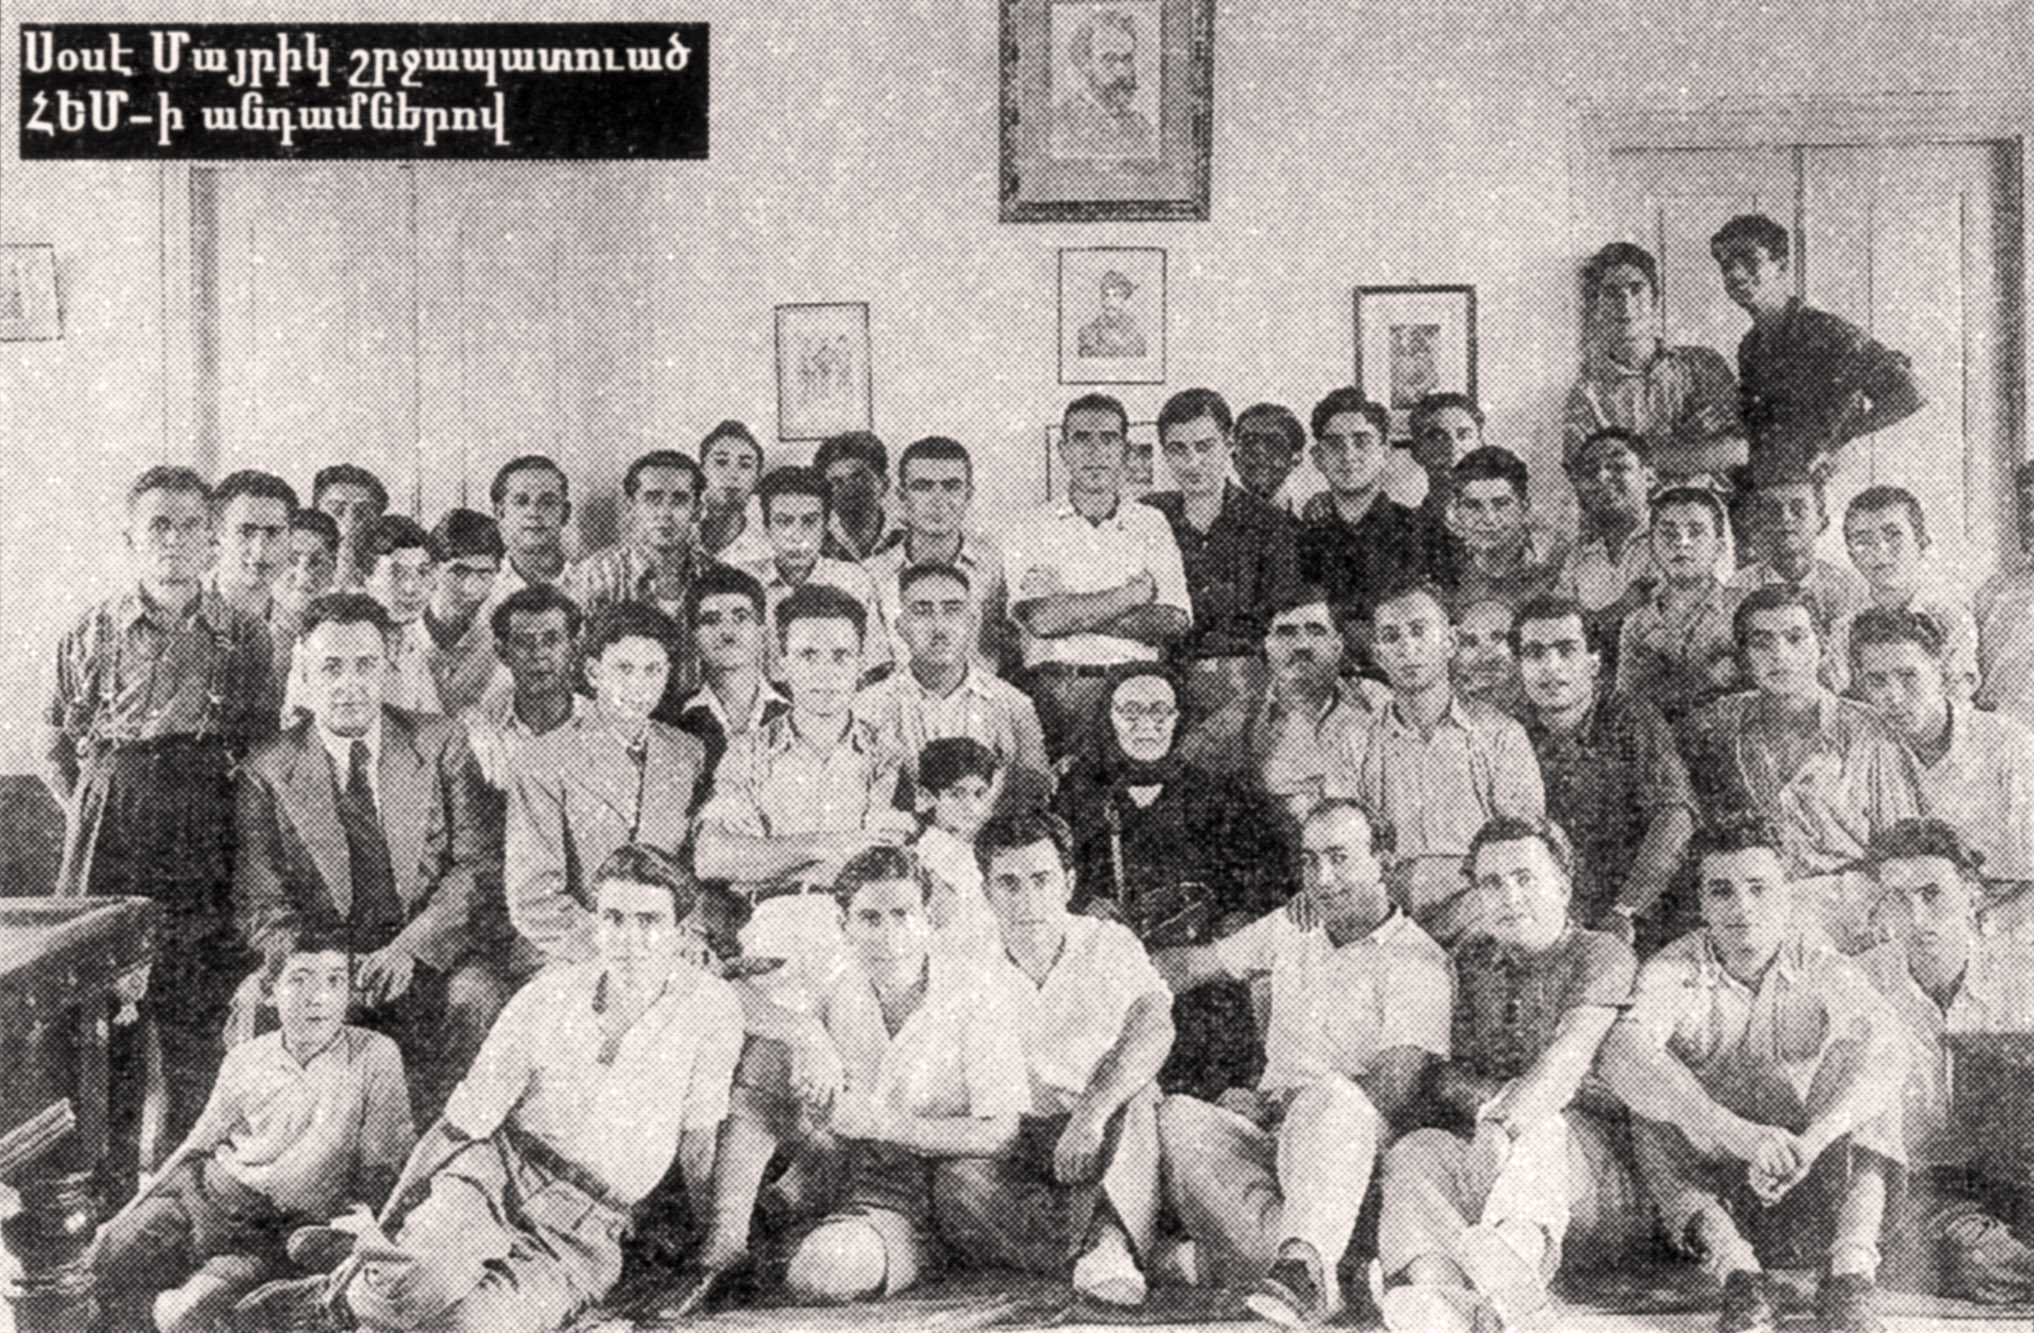 Sose Mayrig meeting with members of an Armenian youth group in Cyprus in 1938